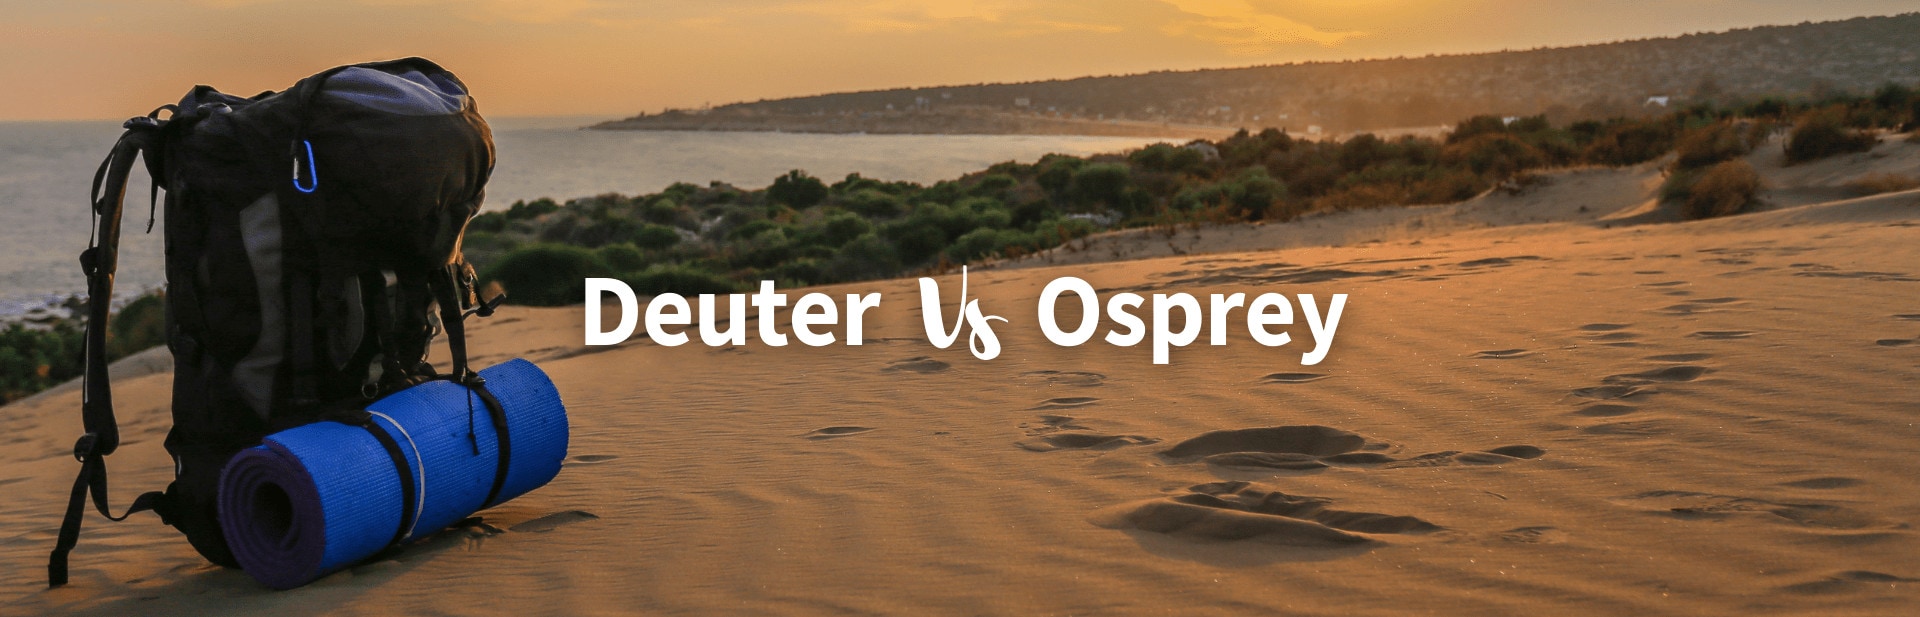 Deuter vs Osprey: Which Backpack Brand is Right for You?